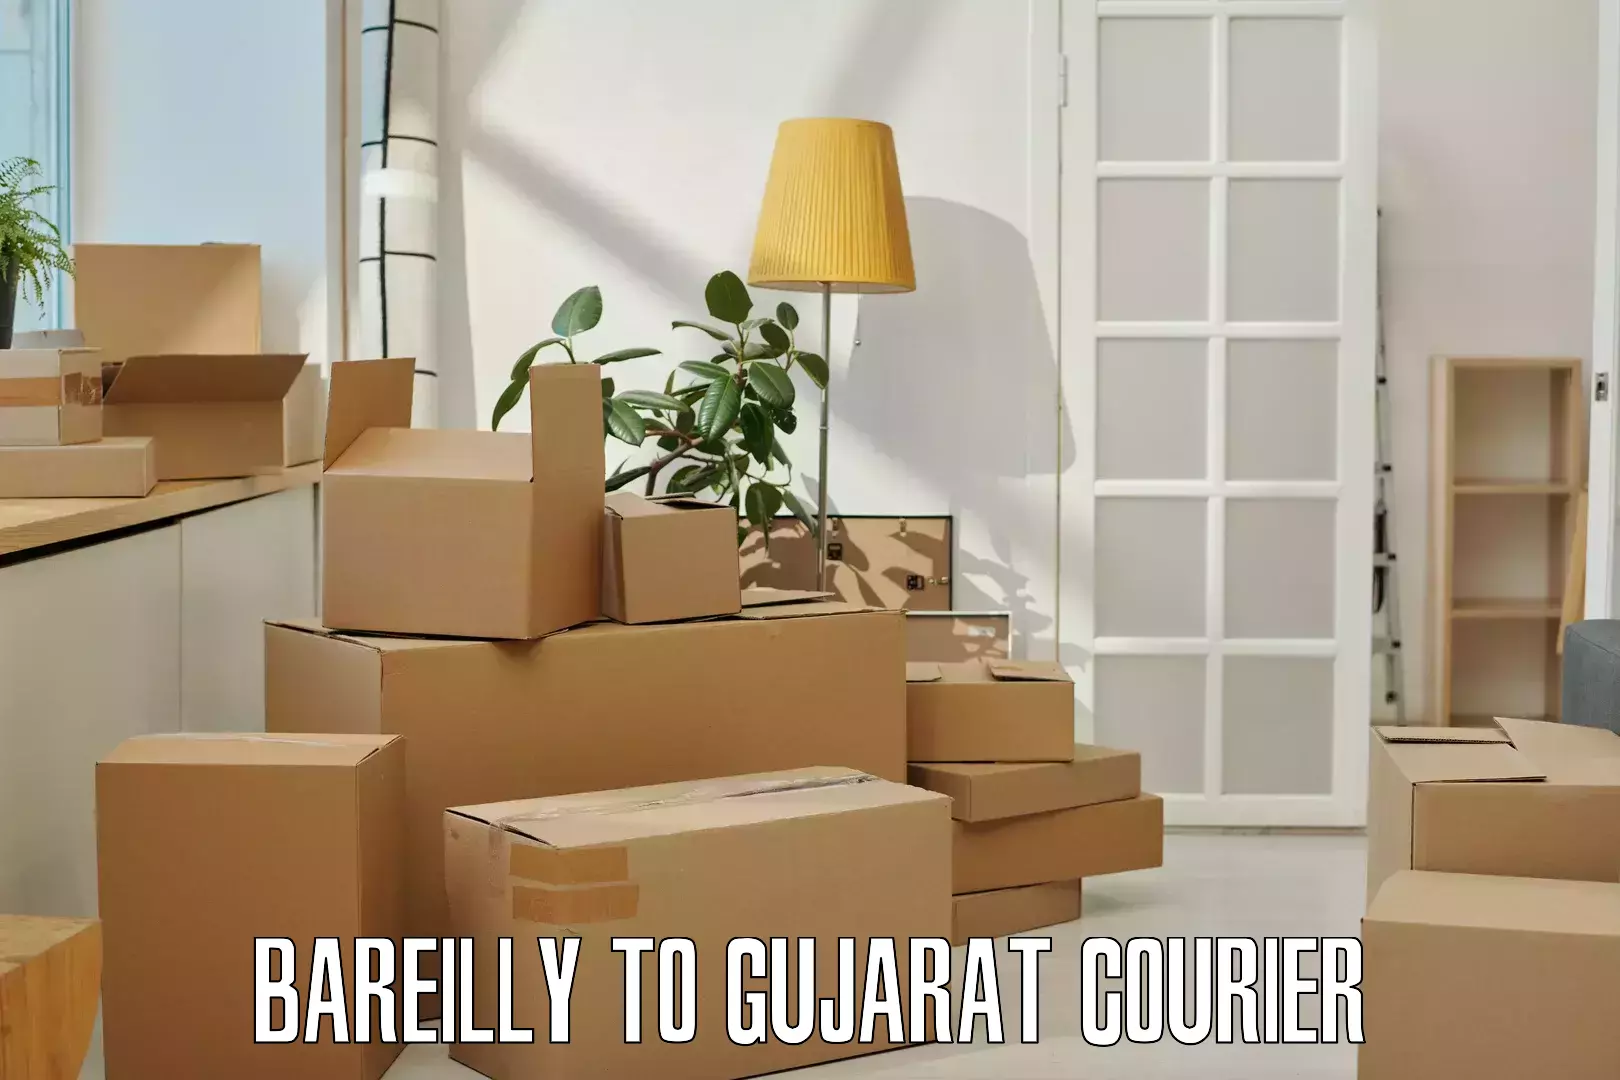 Sustainable delivery practices Bareilly to Gujarat